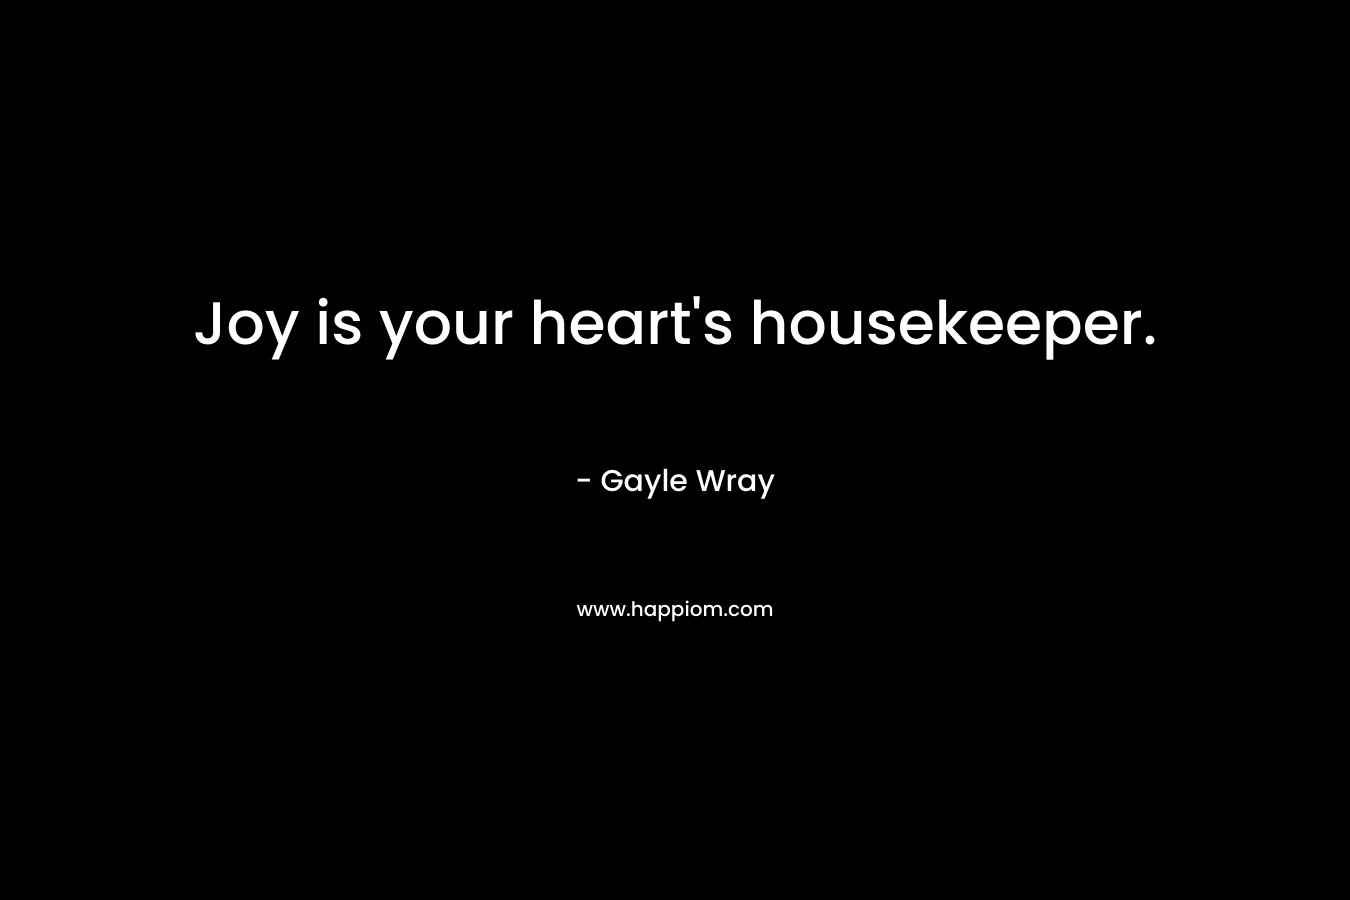 Joy is your heart’s housekeeper. – Gayle Wray